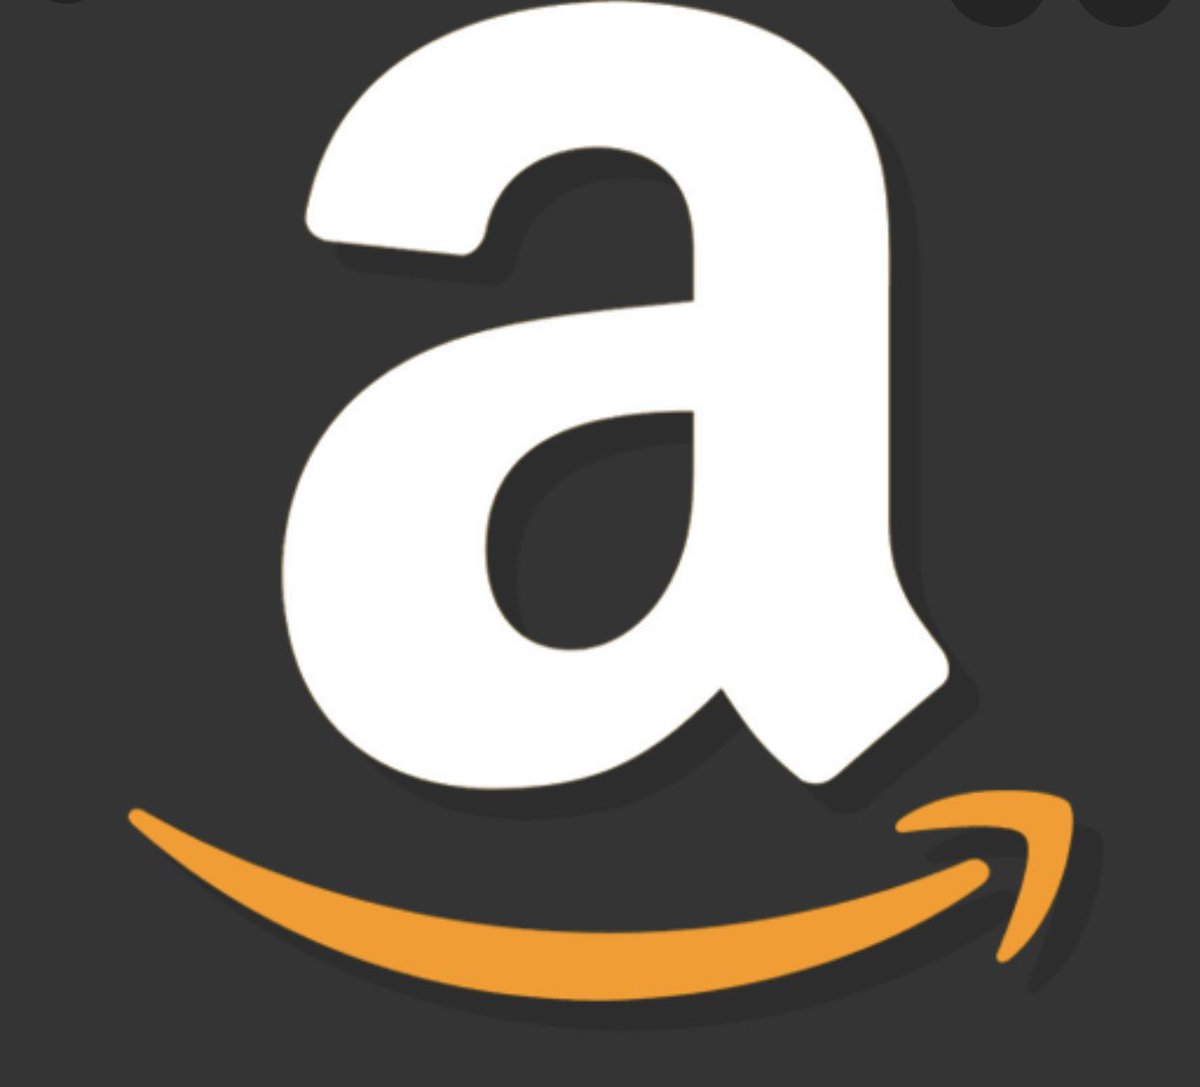 Is it just me ? Does the Amazon logo look like a curved dick?